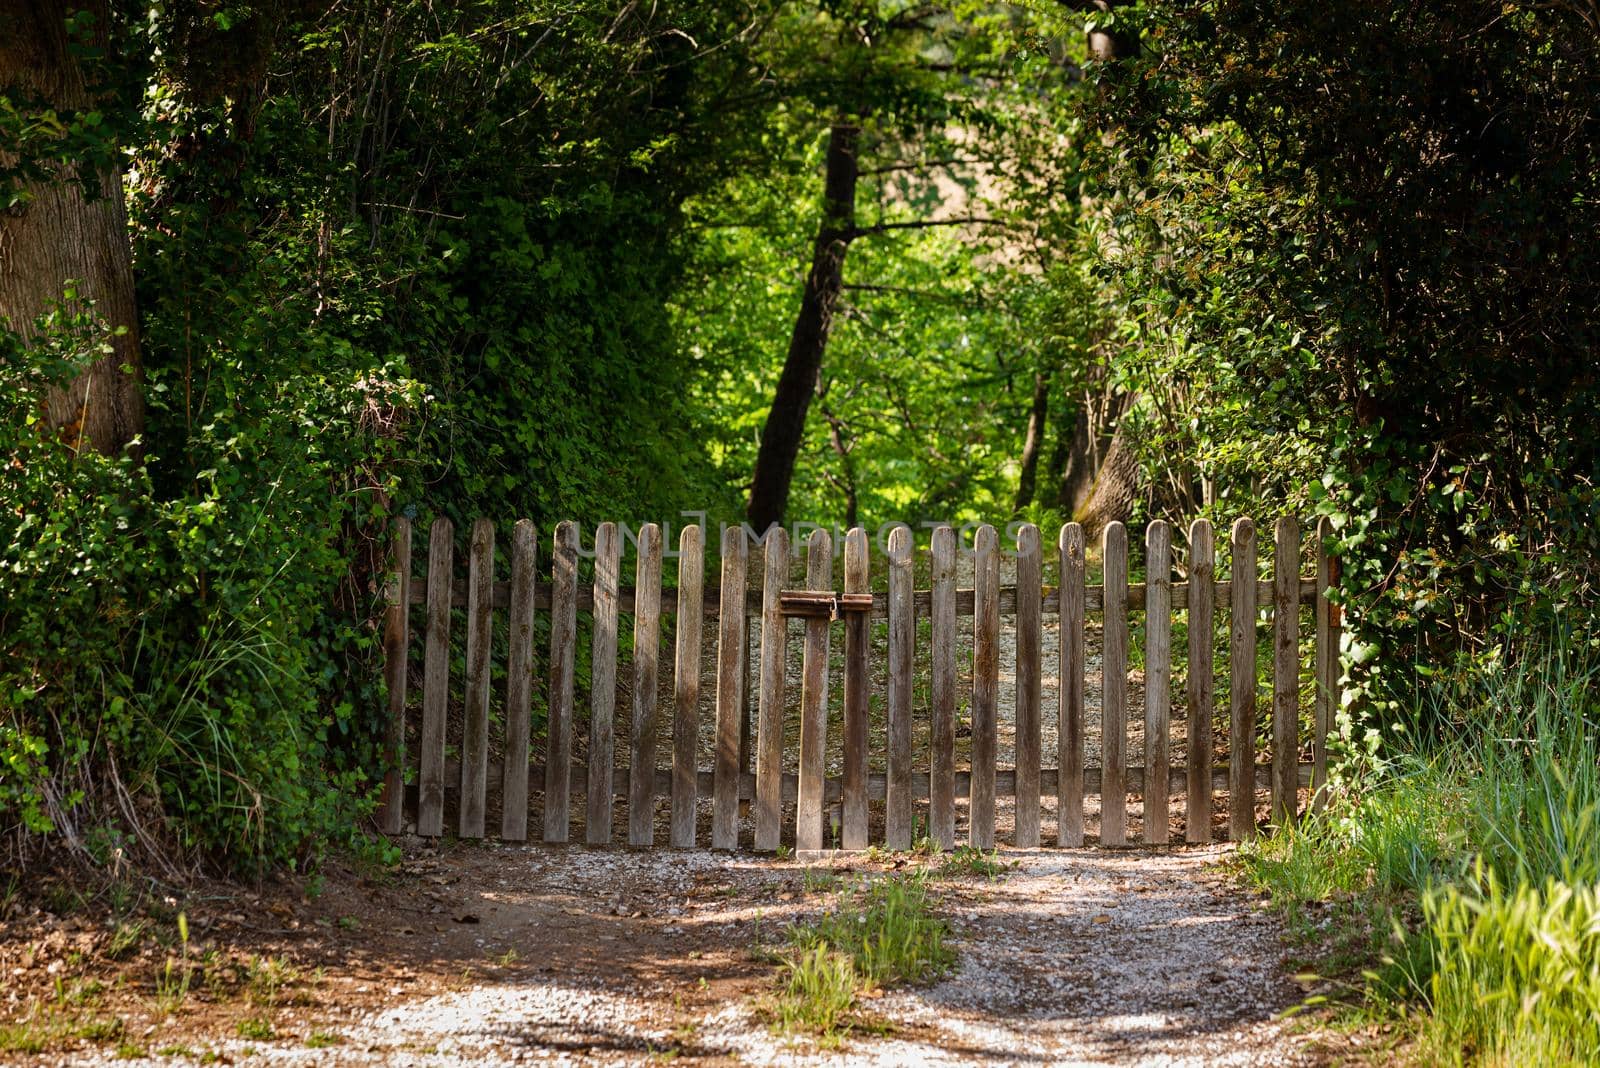 A large weathered wooden gate, with a padlock, on a dirt road under the trees.